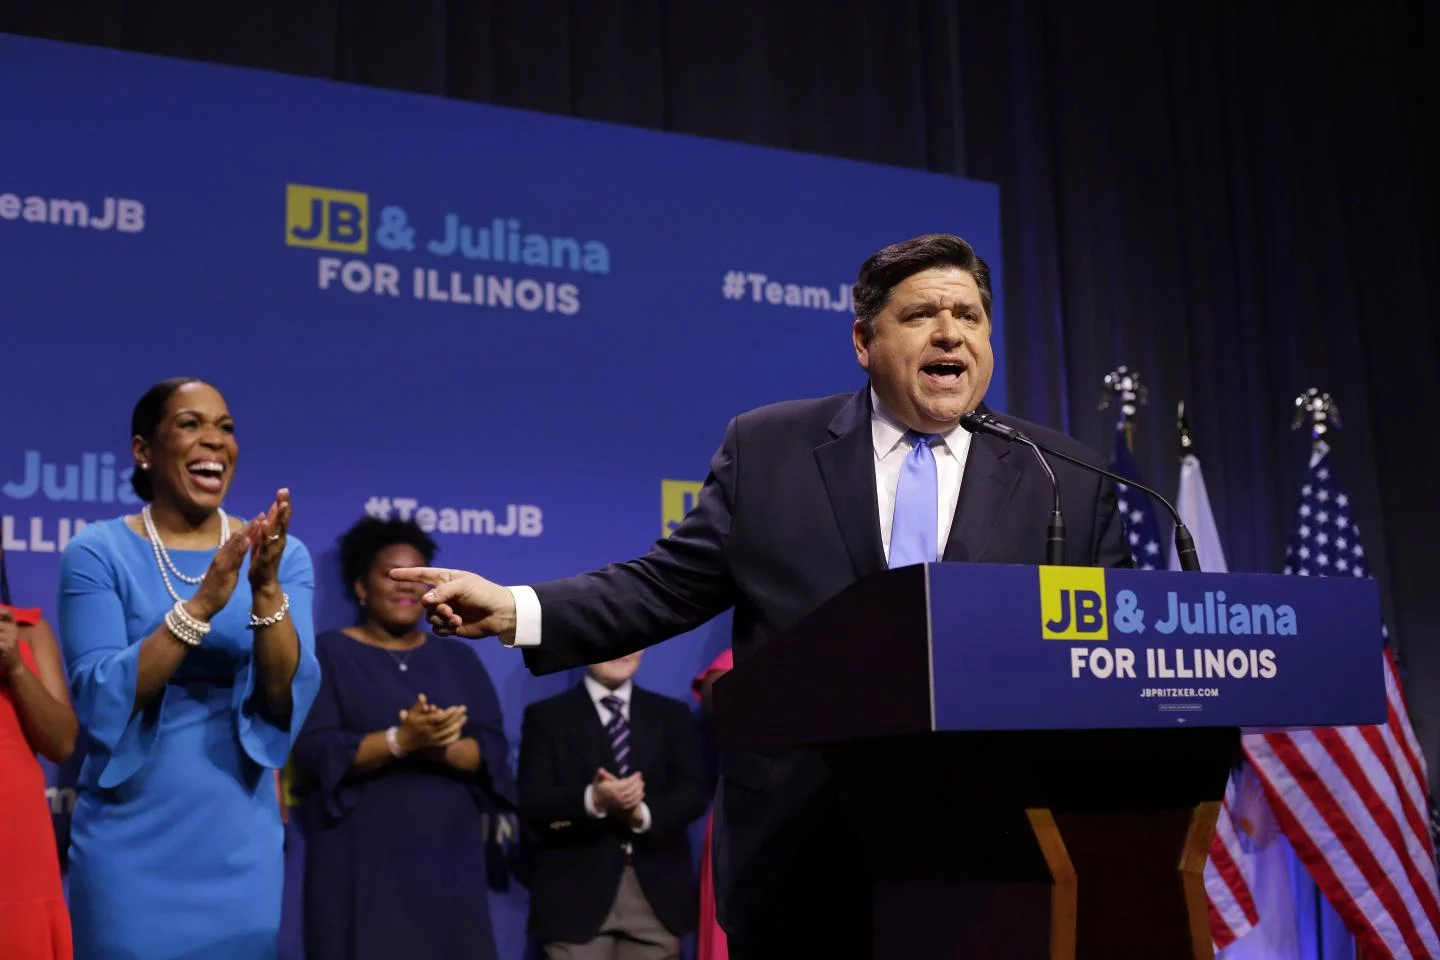 The People’s Governor – Inside the political campaign of JB Pritzker